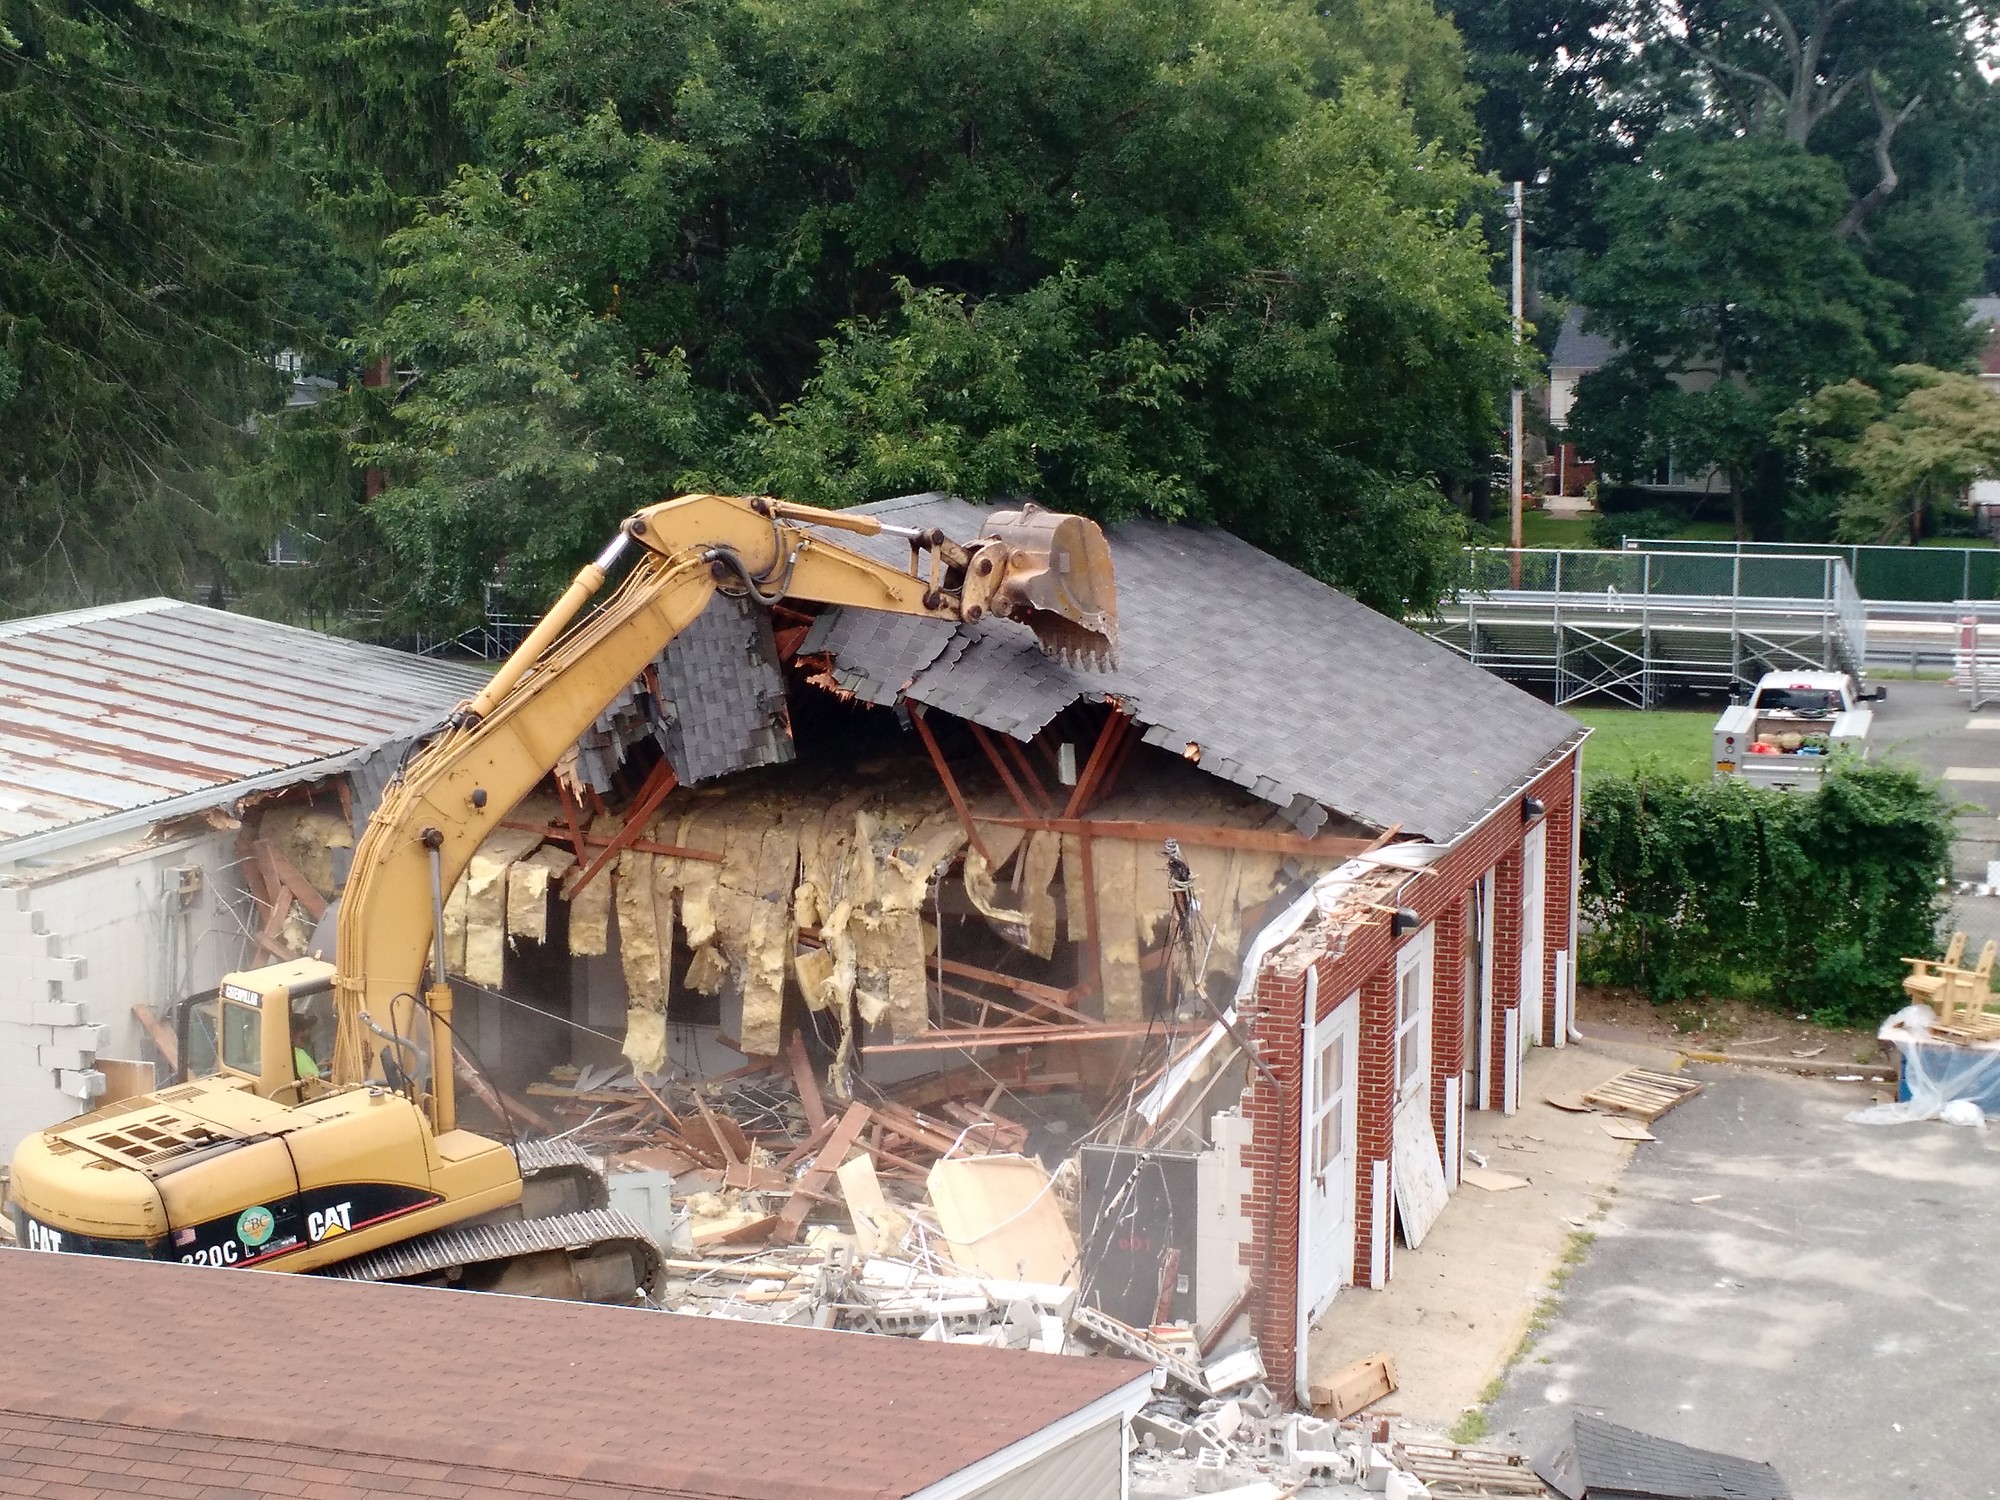 The garage was torn down to make room for the new addition, which will make the campus safer, as doors will no longer have to be left open and unlocked so students can get in and out from the portables.